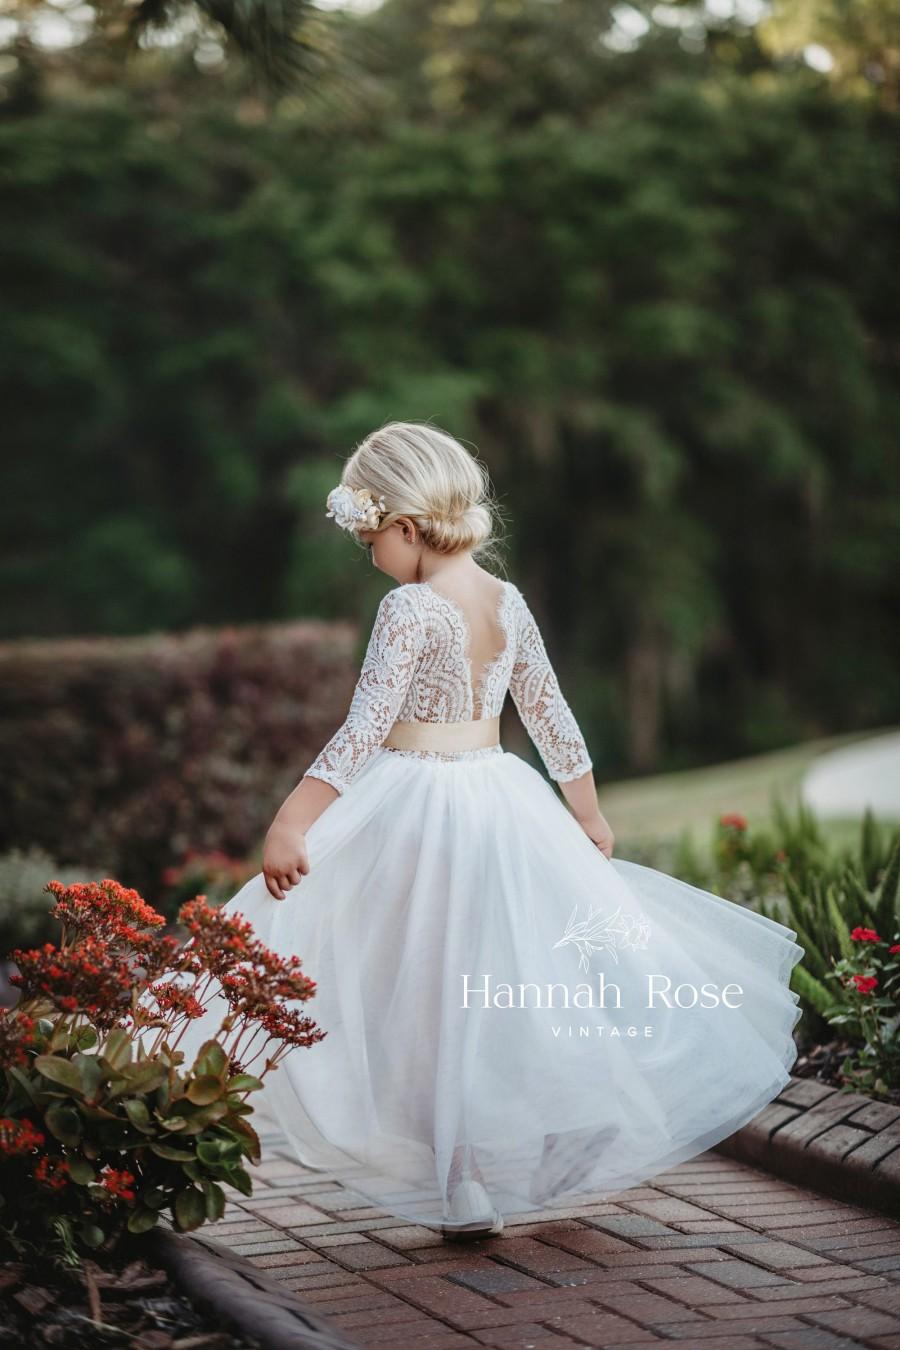 Hochzeit - Beautiful White or Ivory Flower Girl Dress, Long Flowing Flower Girl Gowns, Boho Vintage Country Style Flower Girl Dresses, Tulle and Lace